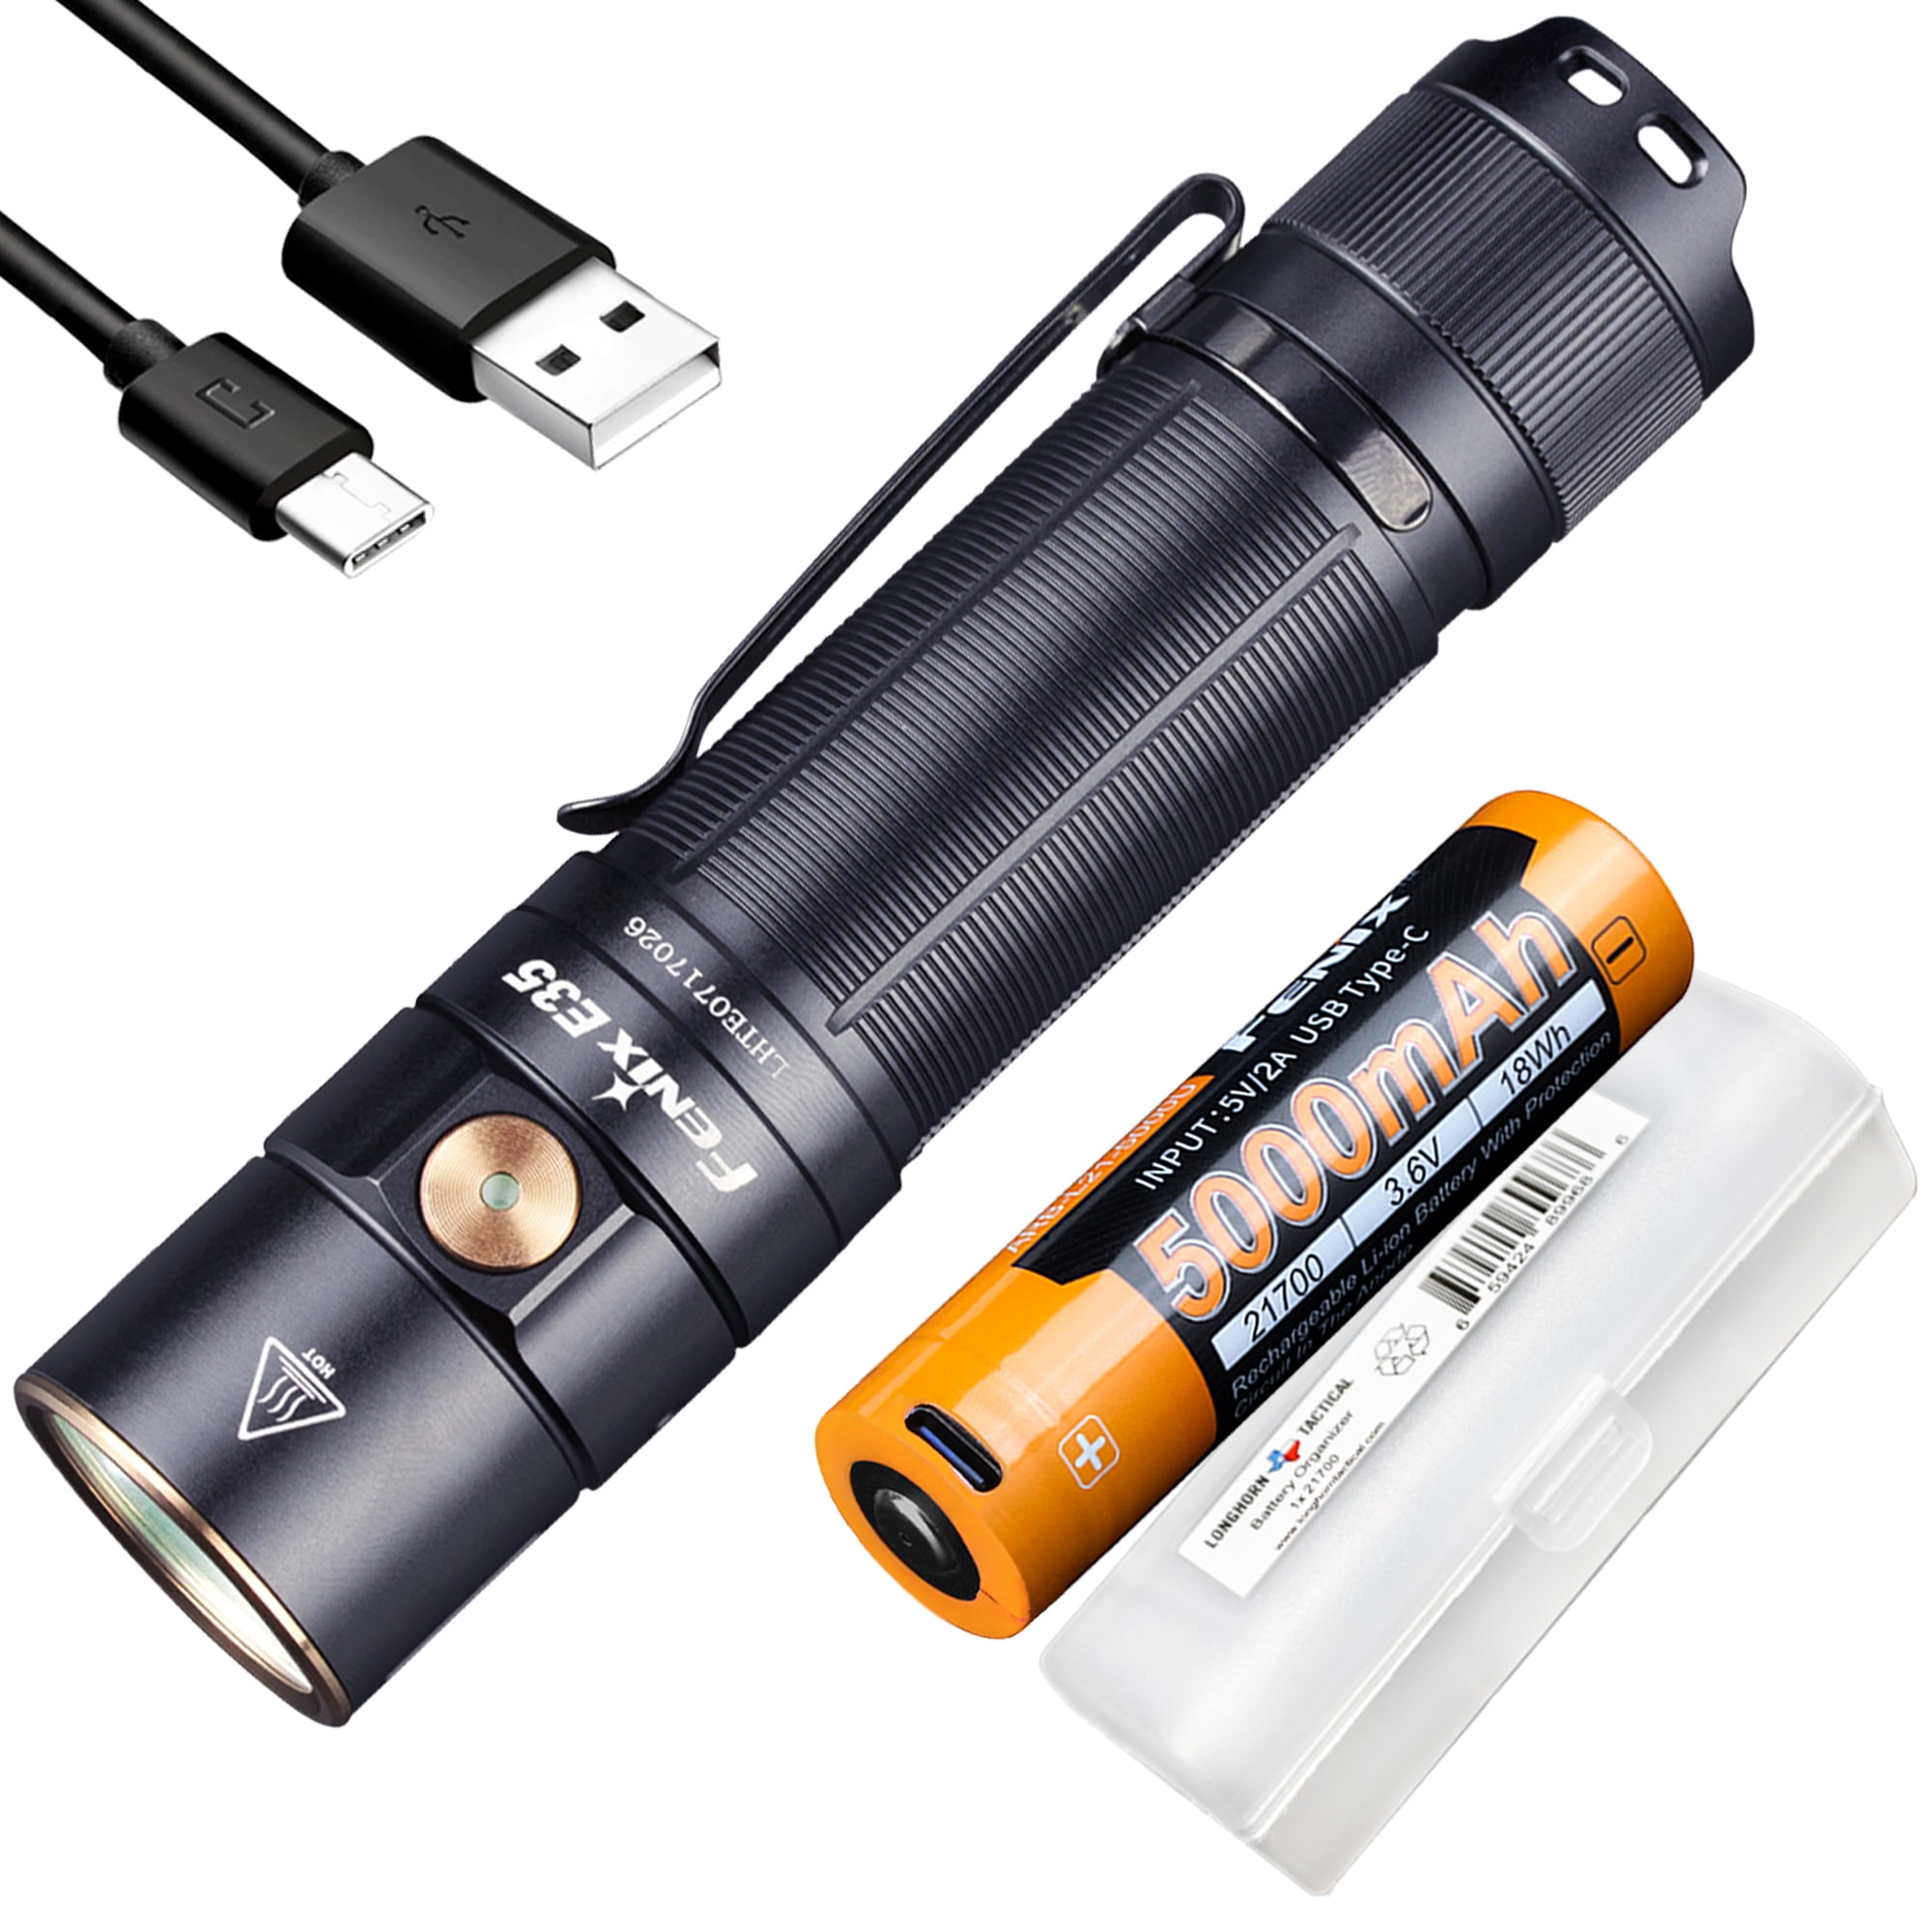 FENIX PD32 TACTICAL FLASHLIGHT 4 BATTERIES AND CHARGER COMBO KIT 